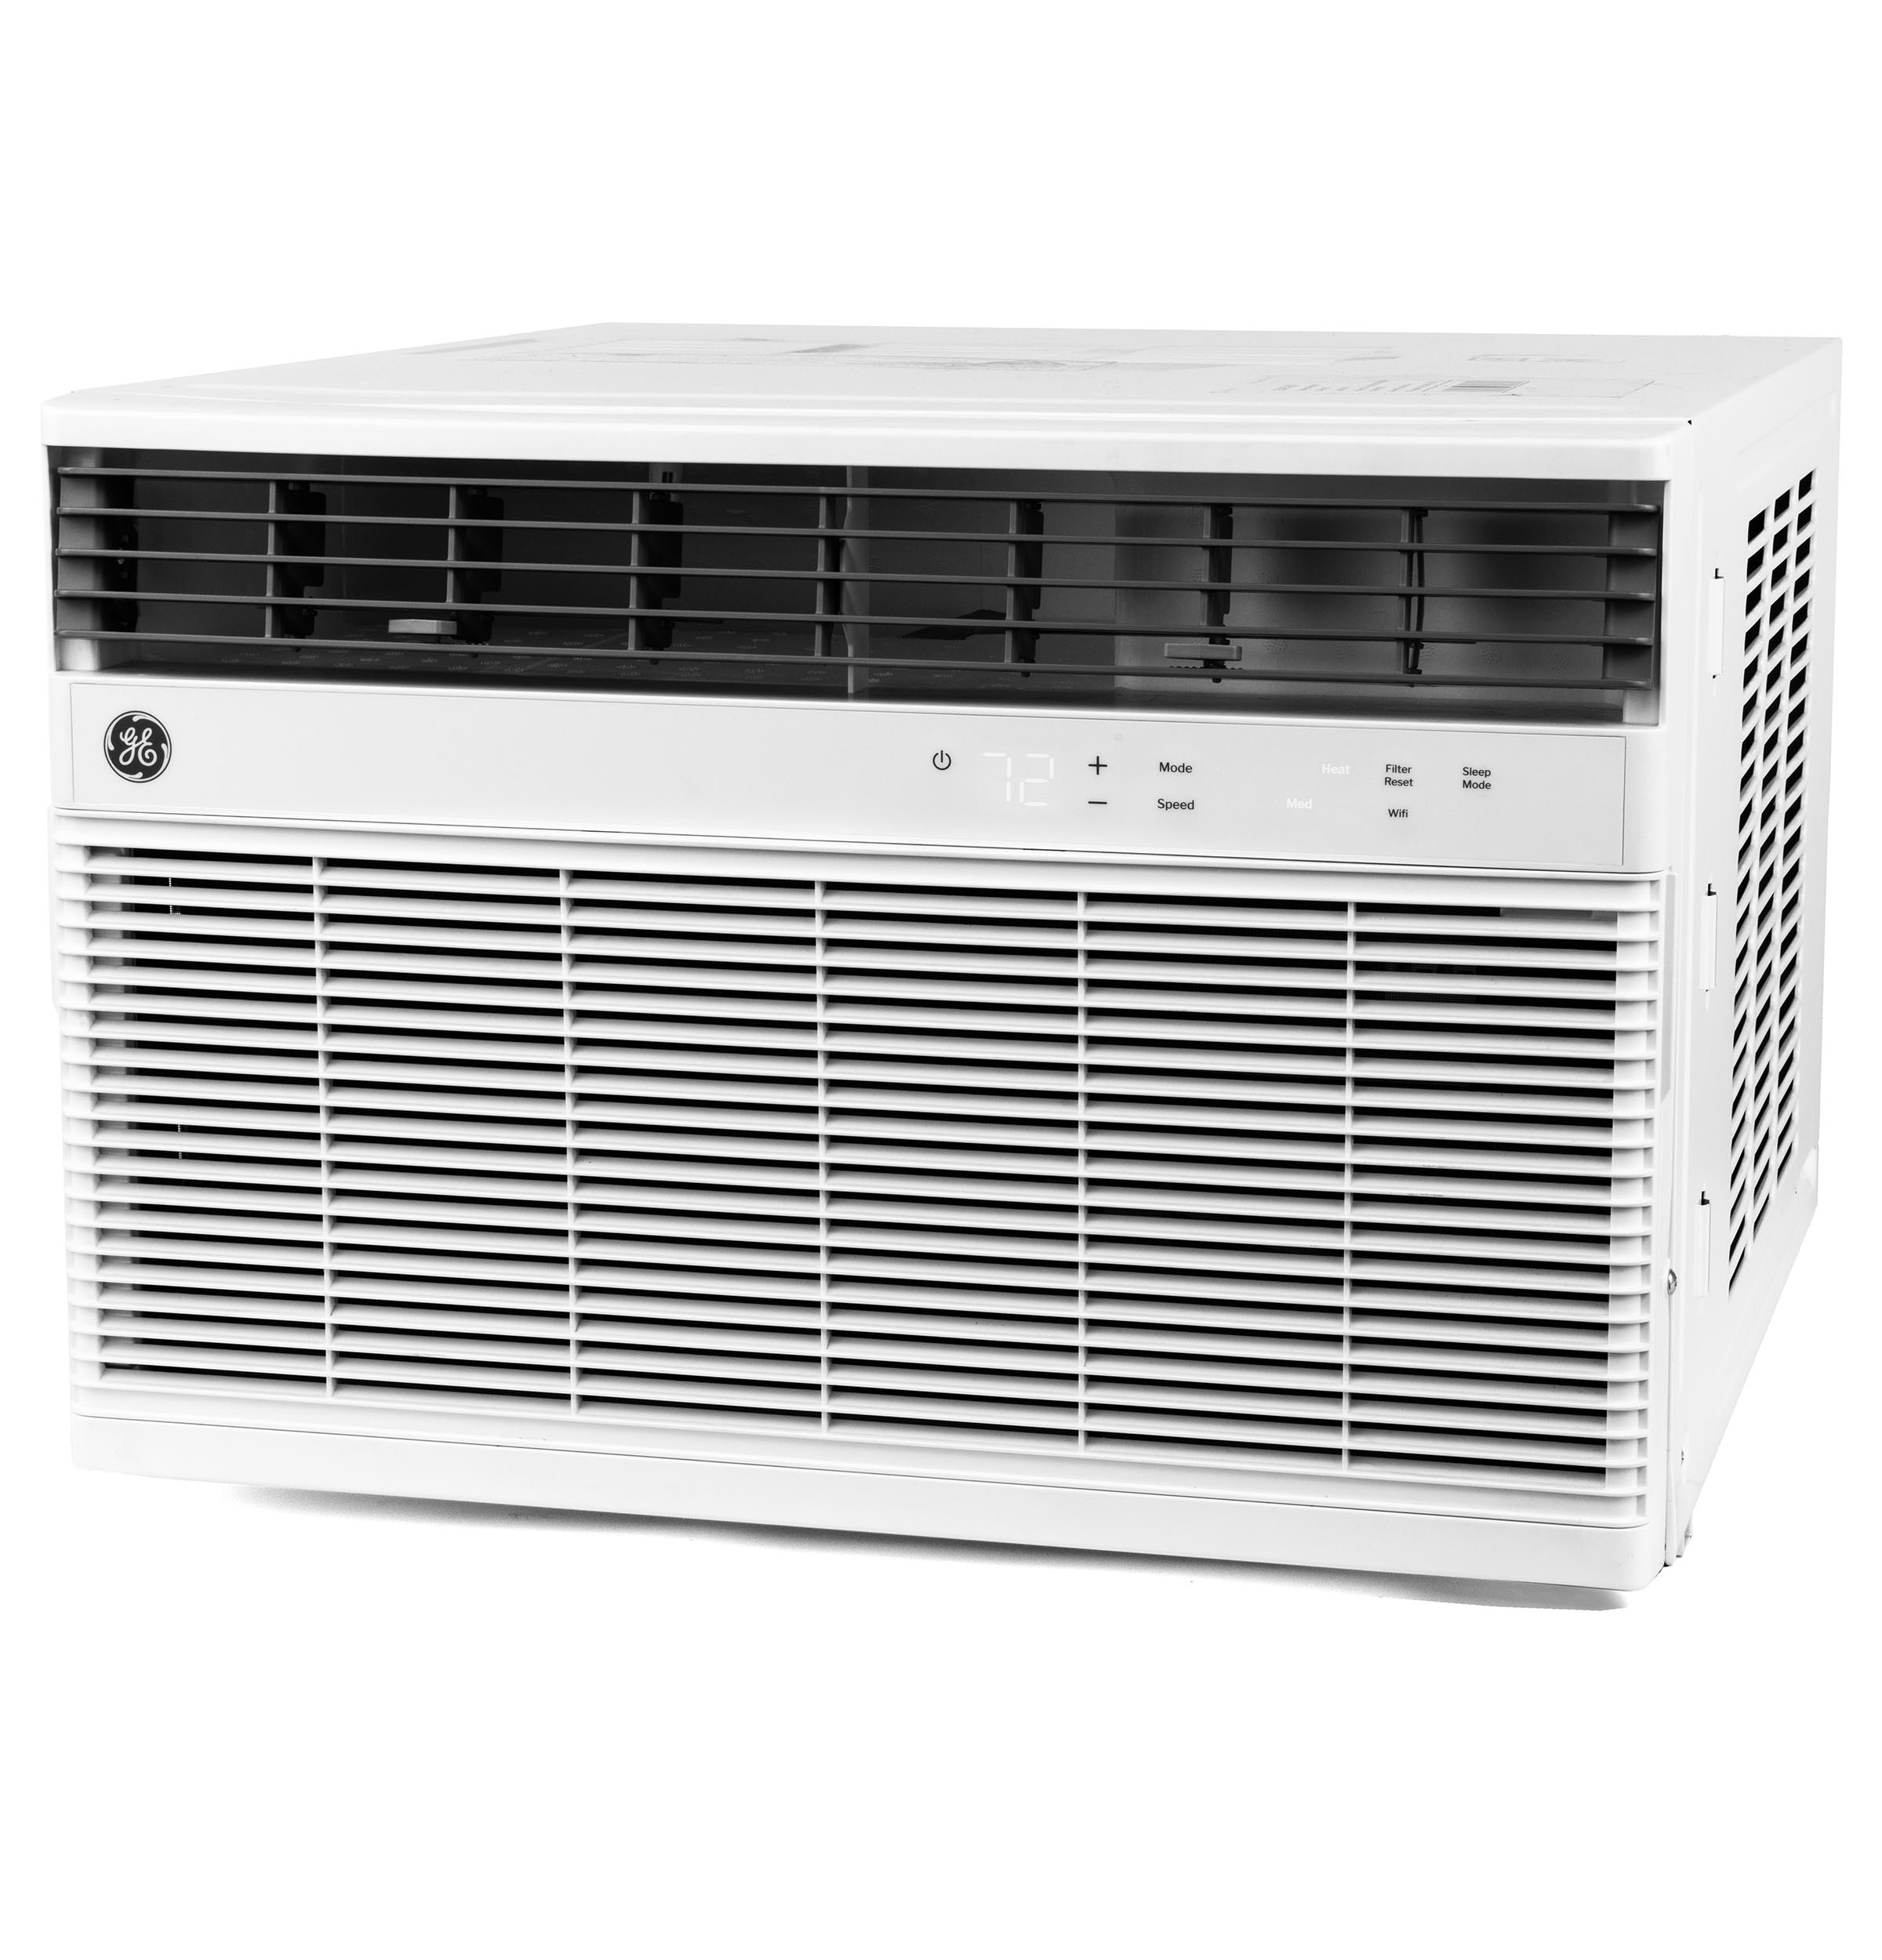 Ge Appliances AWGH18WWF Ge® 18,000 Btu Smart Heat/Cool Electronic Window Air Conditioner For Extra-Large Rooms Up To 1000 Sq. Ft.